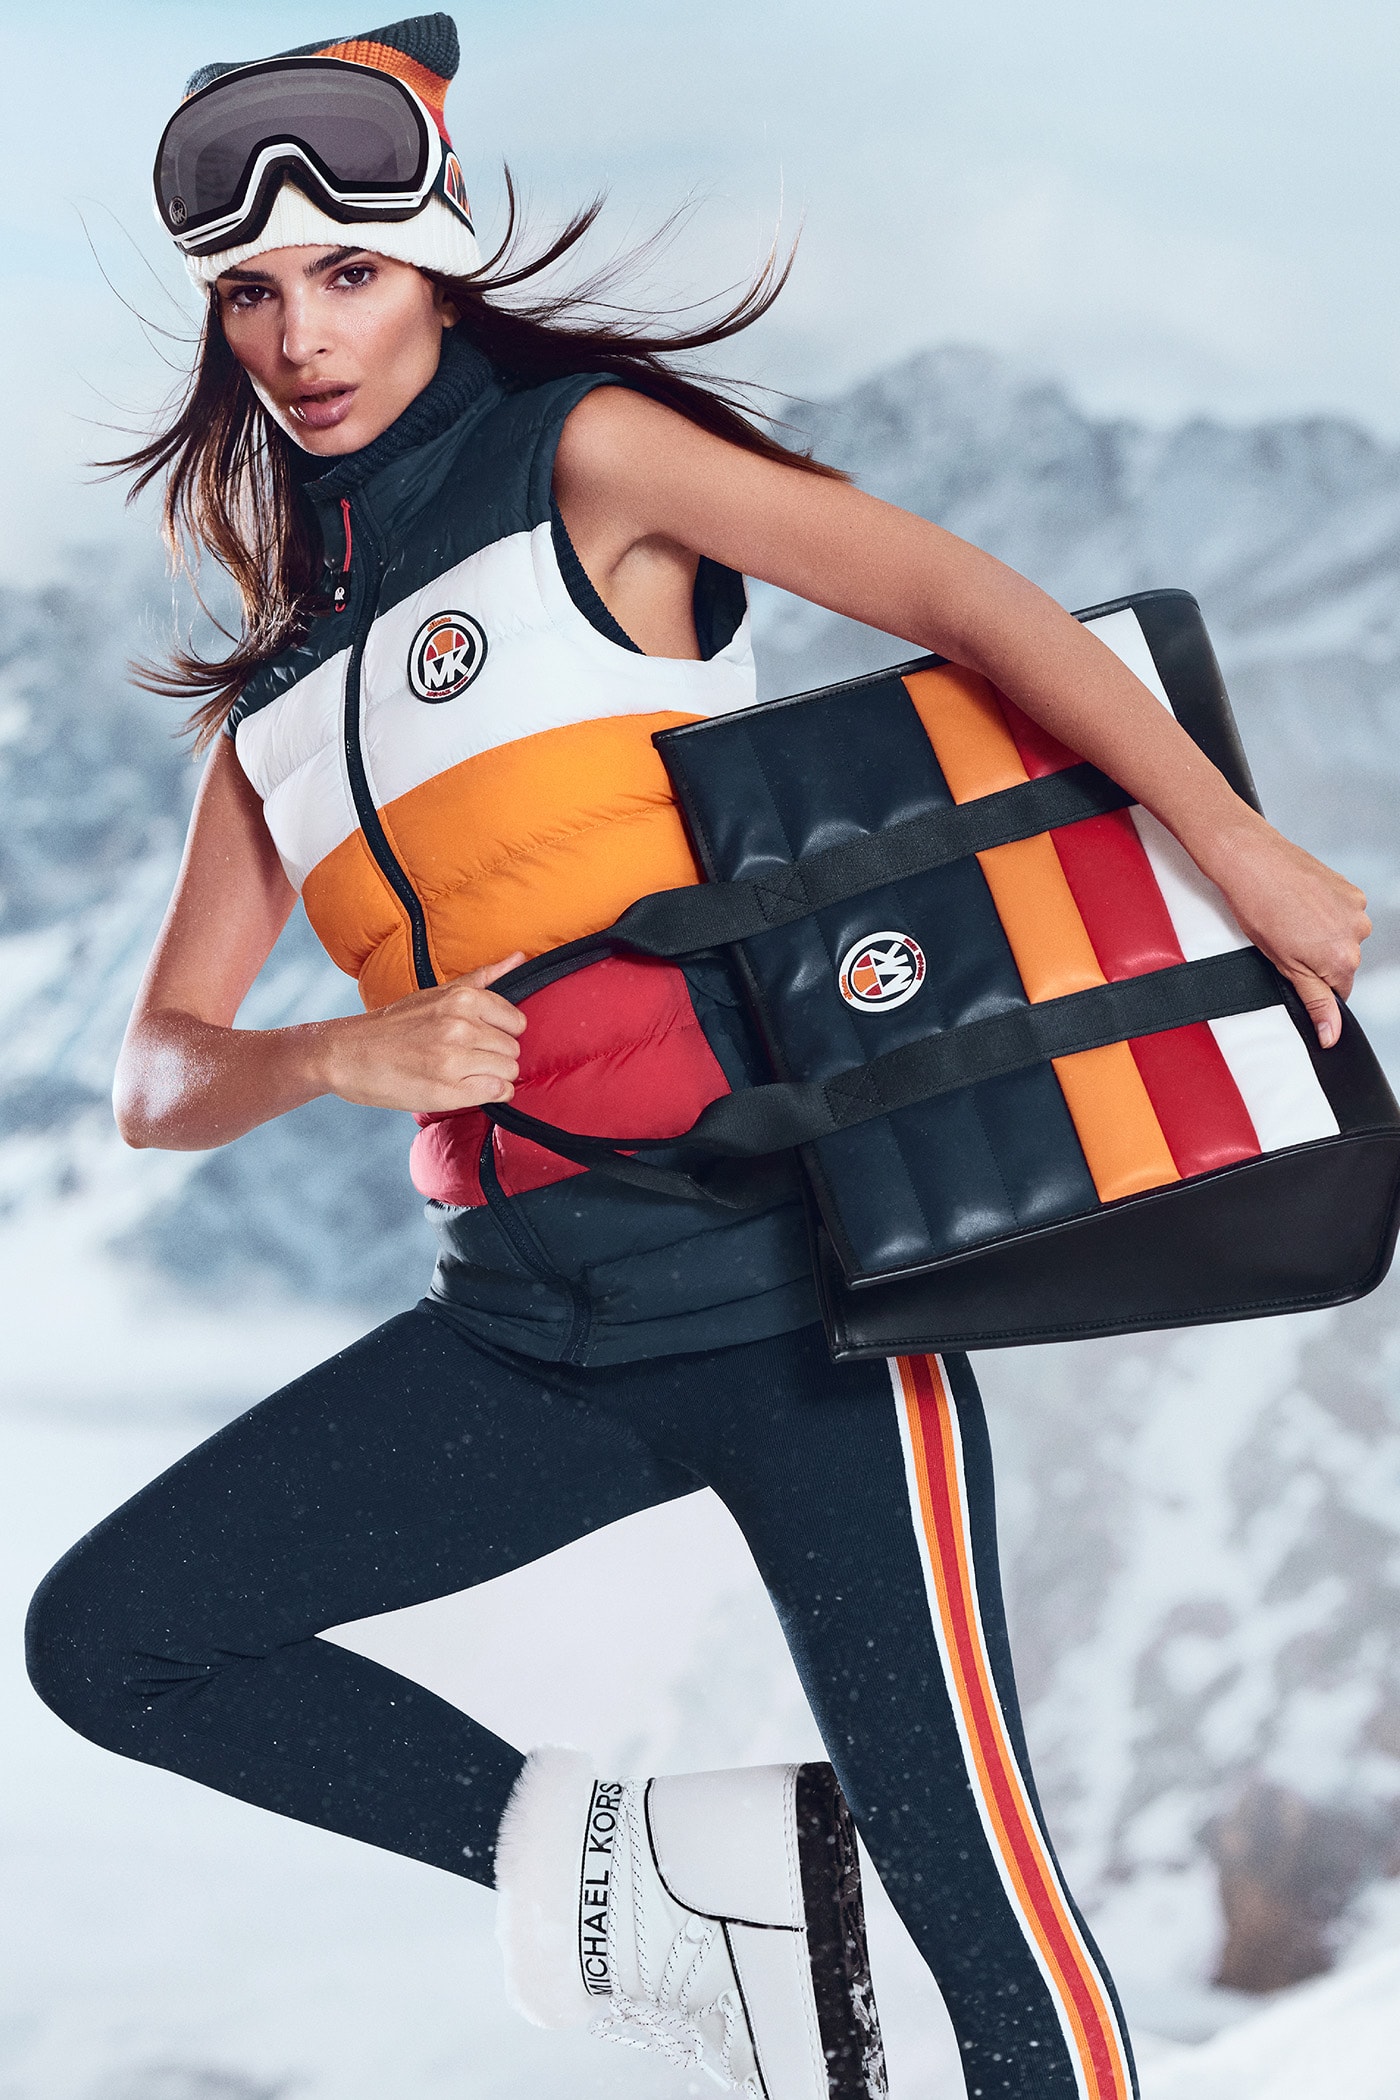 Michael Kors and ellesse Ski Inspired Capsule Collection